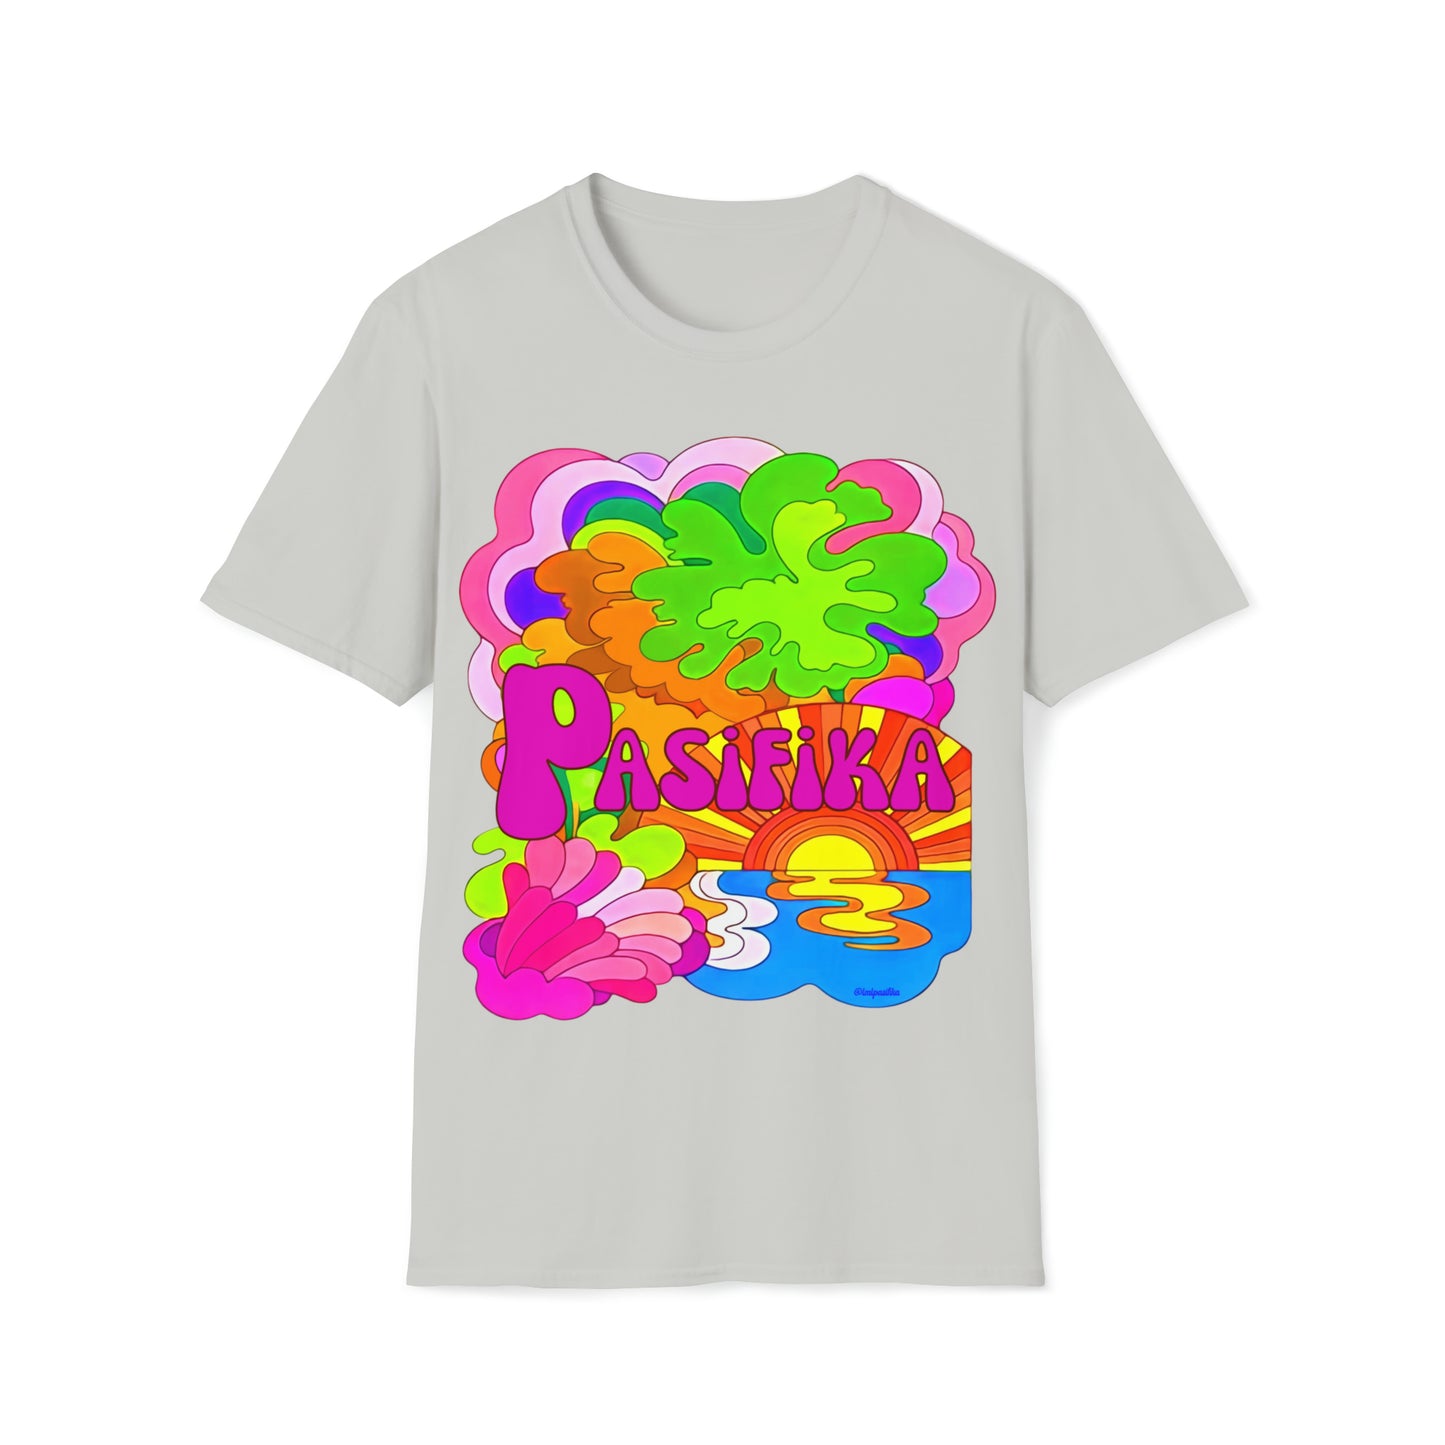 70s Pasifika Graphic Tee Psychedelic Shirt Pacific Islander Hippie Vintage Groovy Colorful Aesthetic Art Shirt 70s Inspired-Heliaki